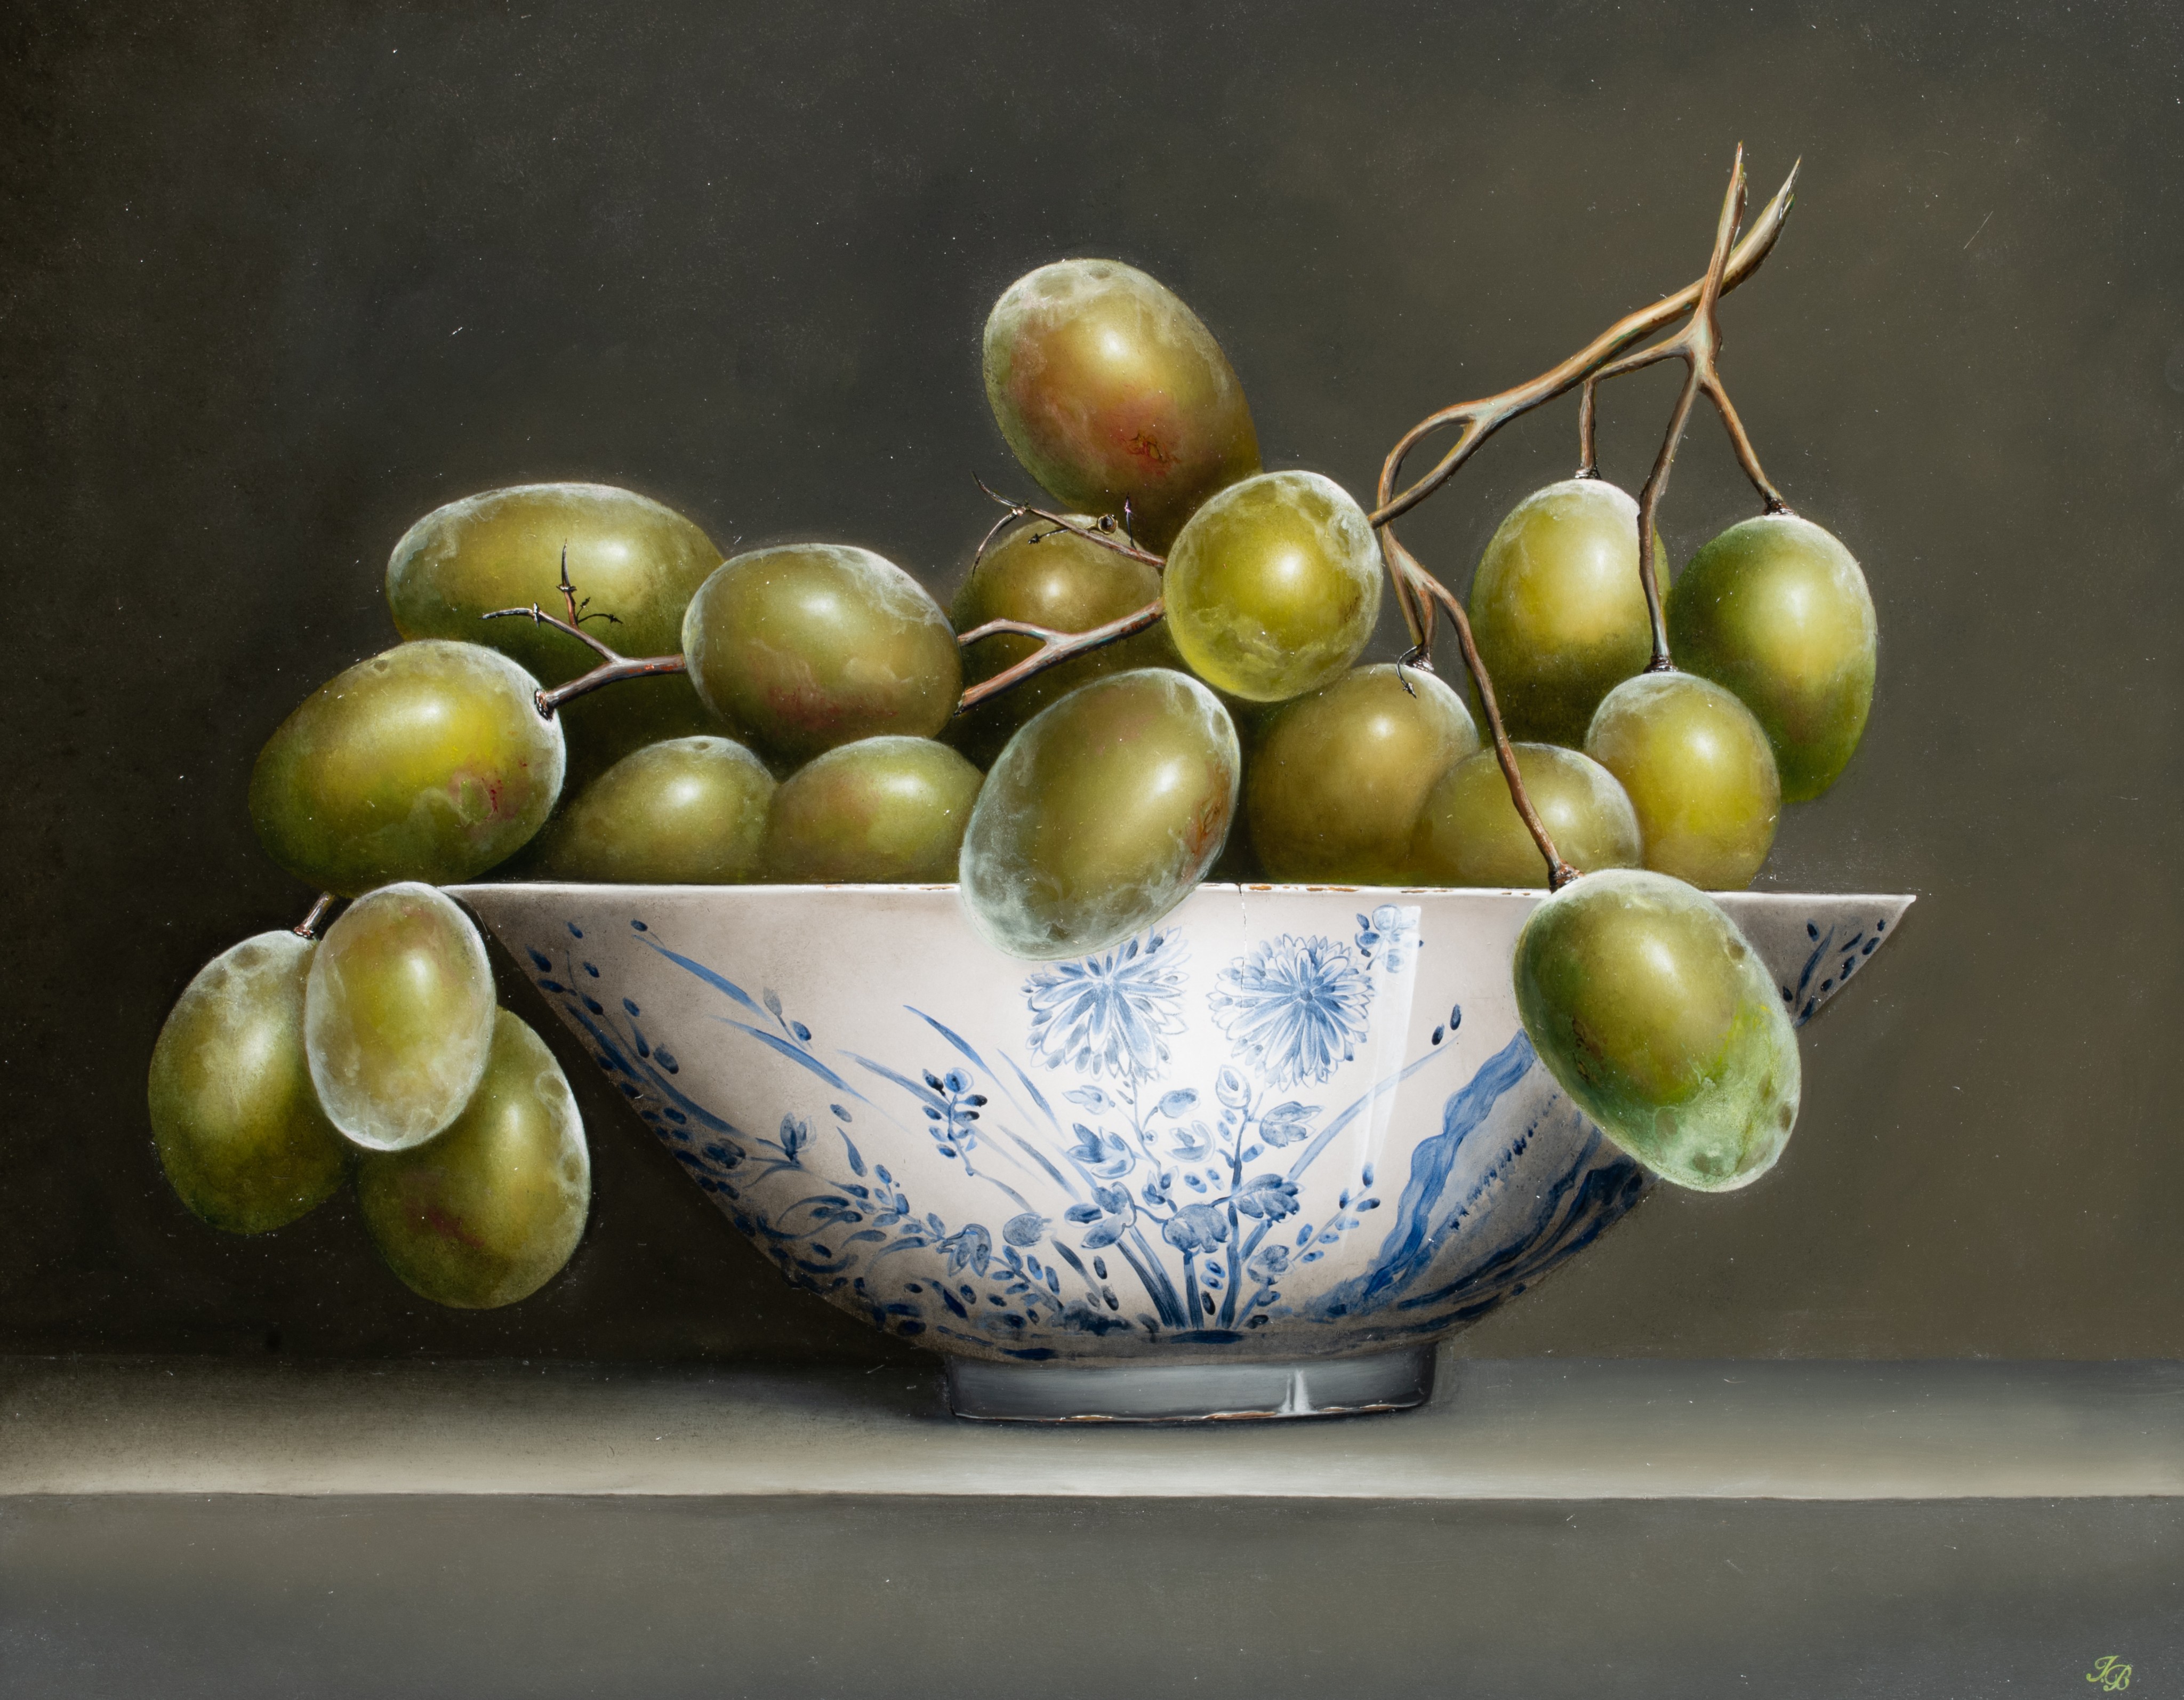 Ignace Bauwens, still life with grapes in a Chinese blossom bowl, oil on panel, 80 x 100 cm